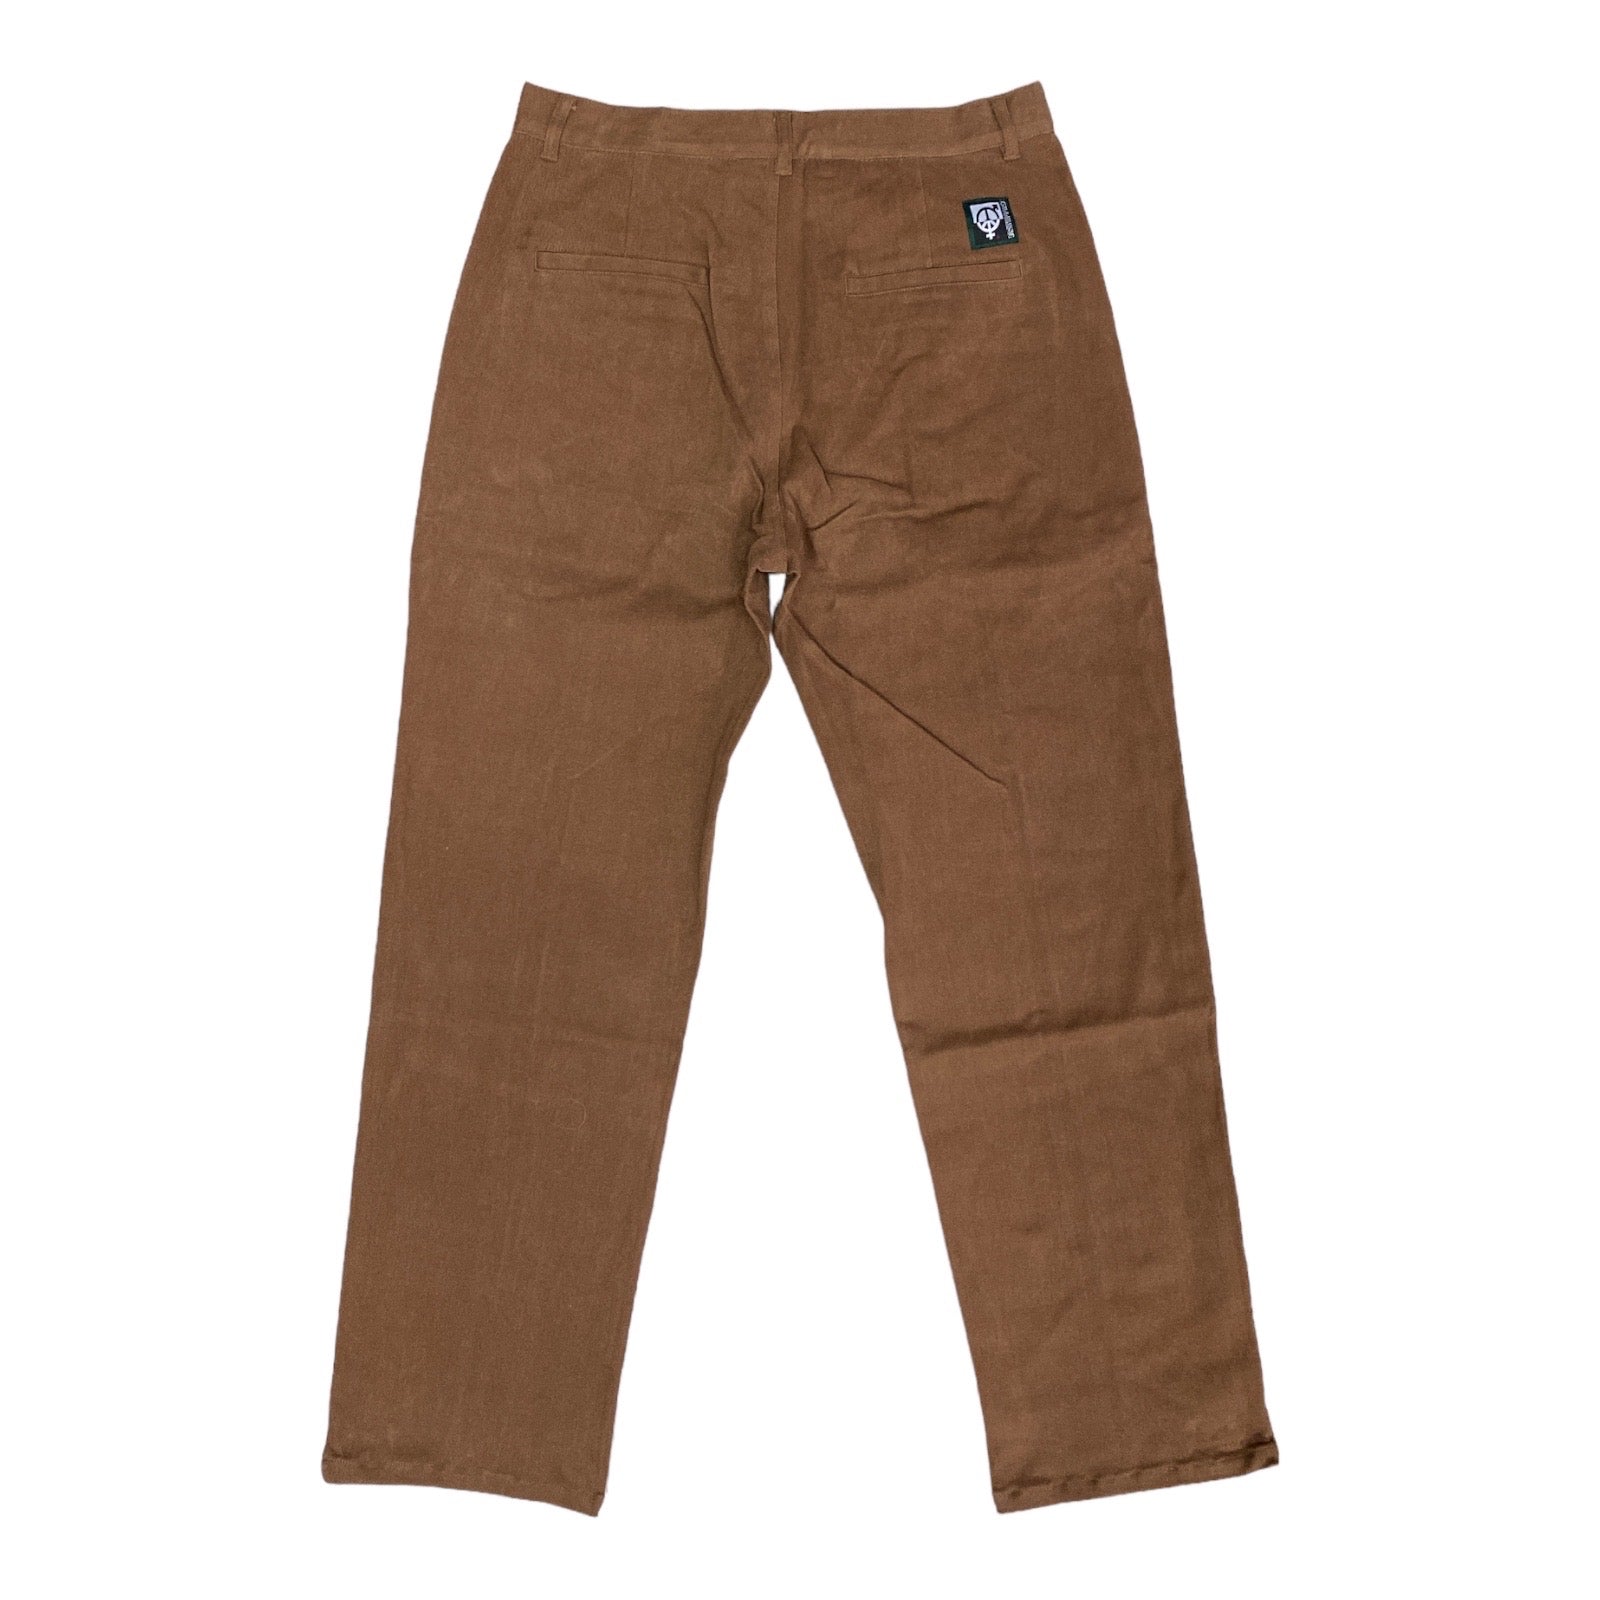 SEXHIPPIES Stitched Crease Work Pant- Chestnut